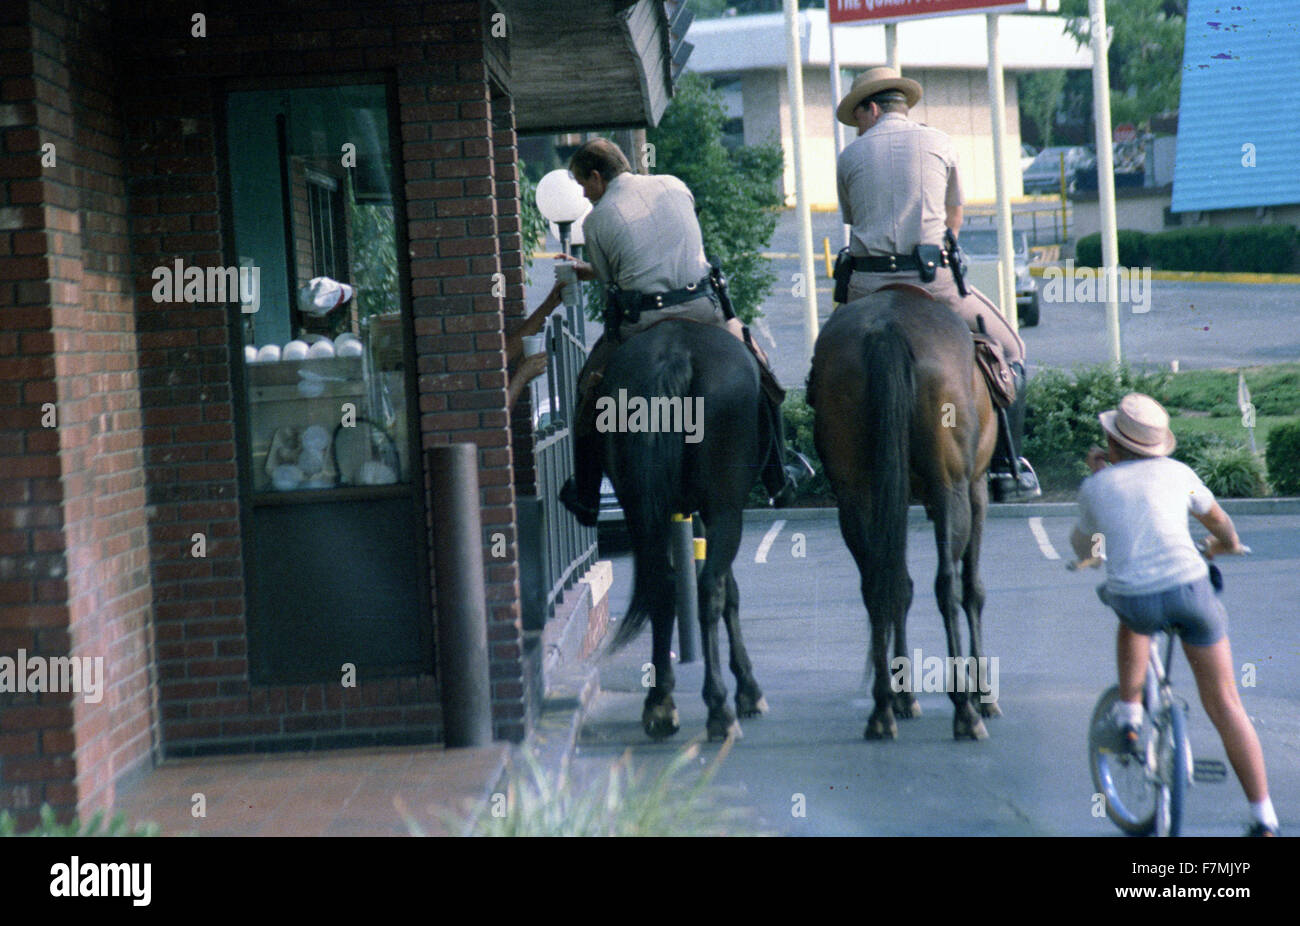 2 policemen on horseback and a small child on a bicycle at a drive in window at a McDonalds Restaurant Stock Photo